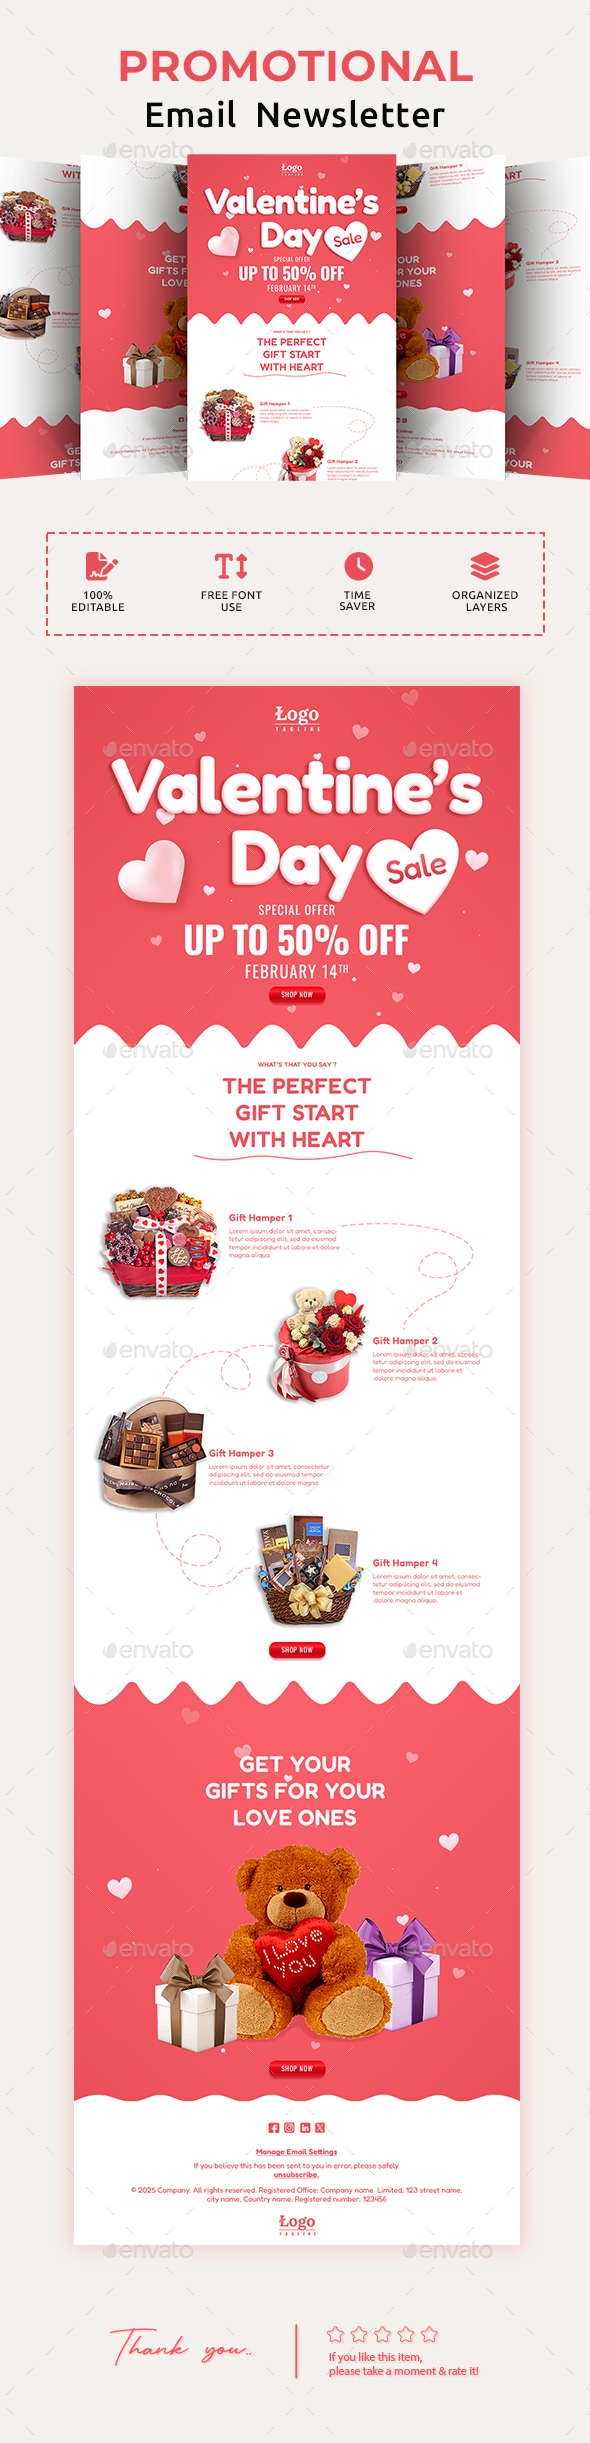 Valentine's Day Gift Shop Email Newsletter PSD Template